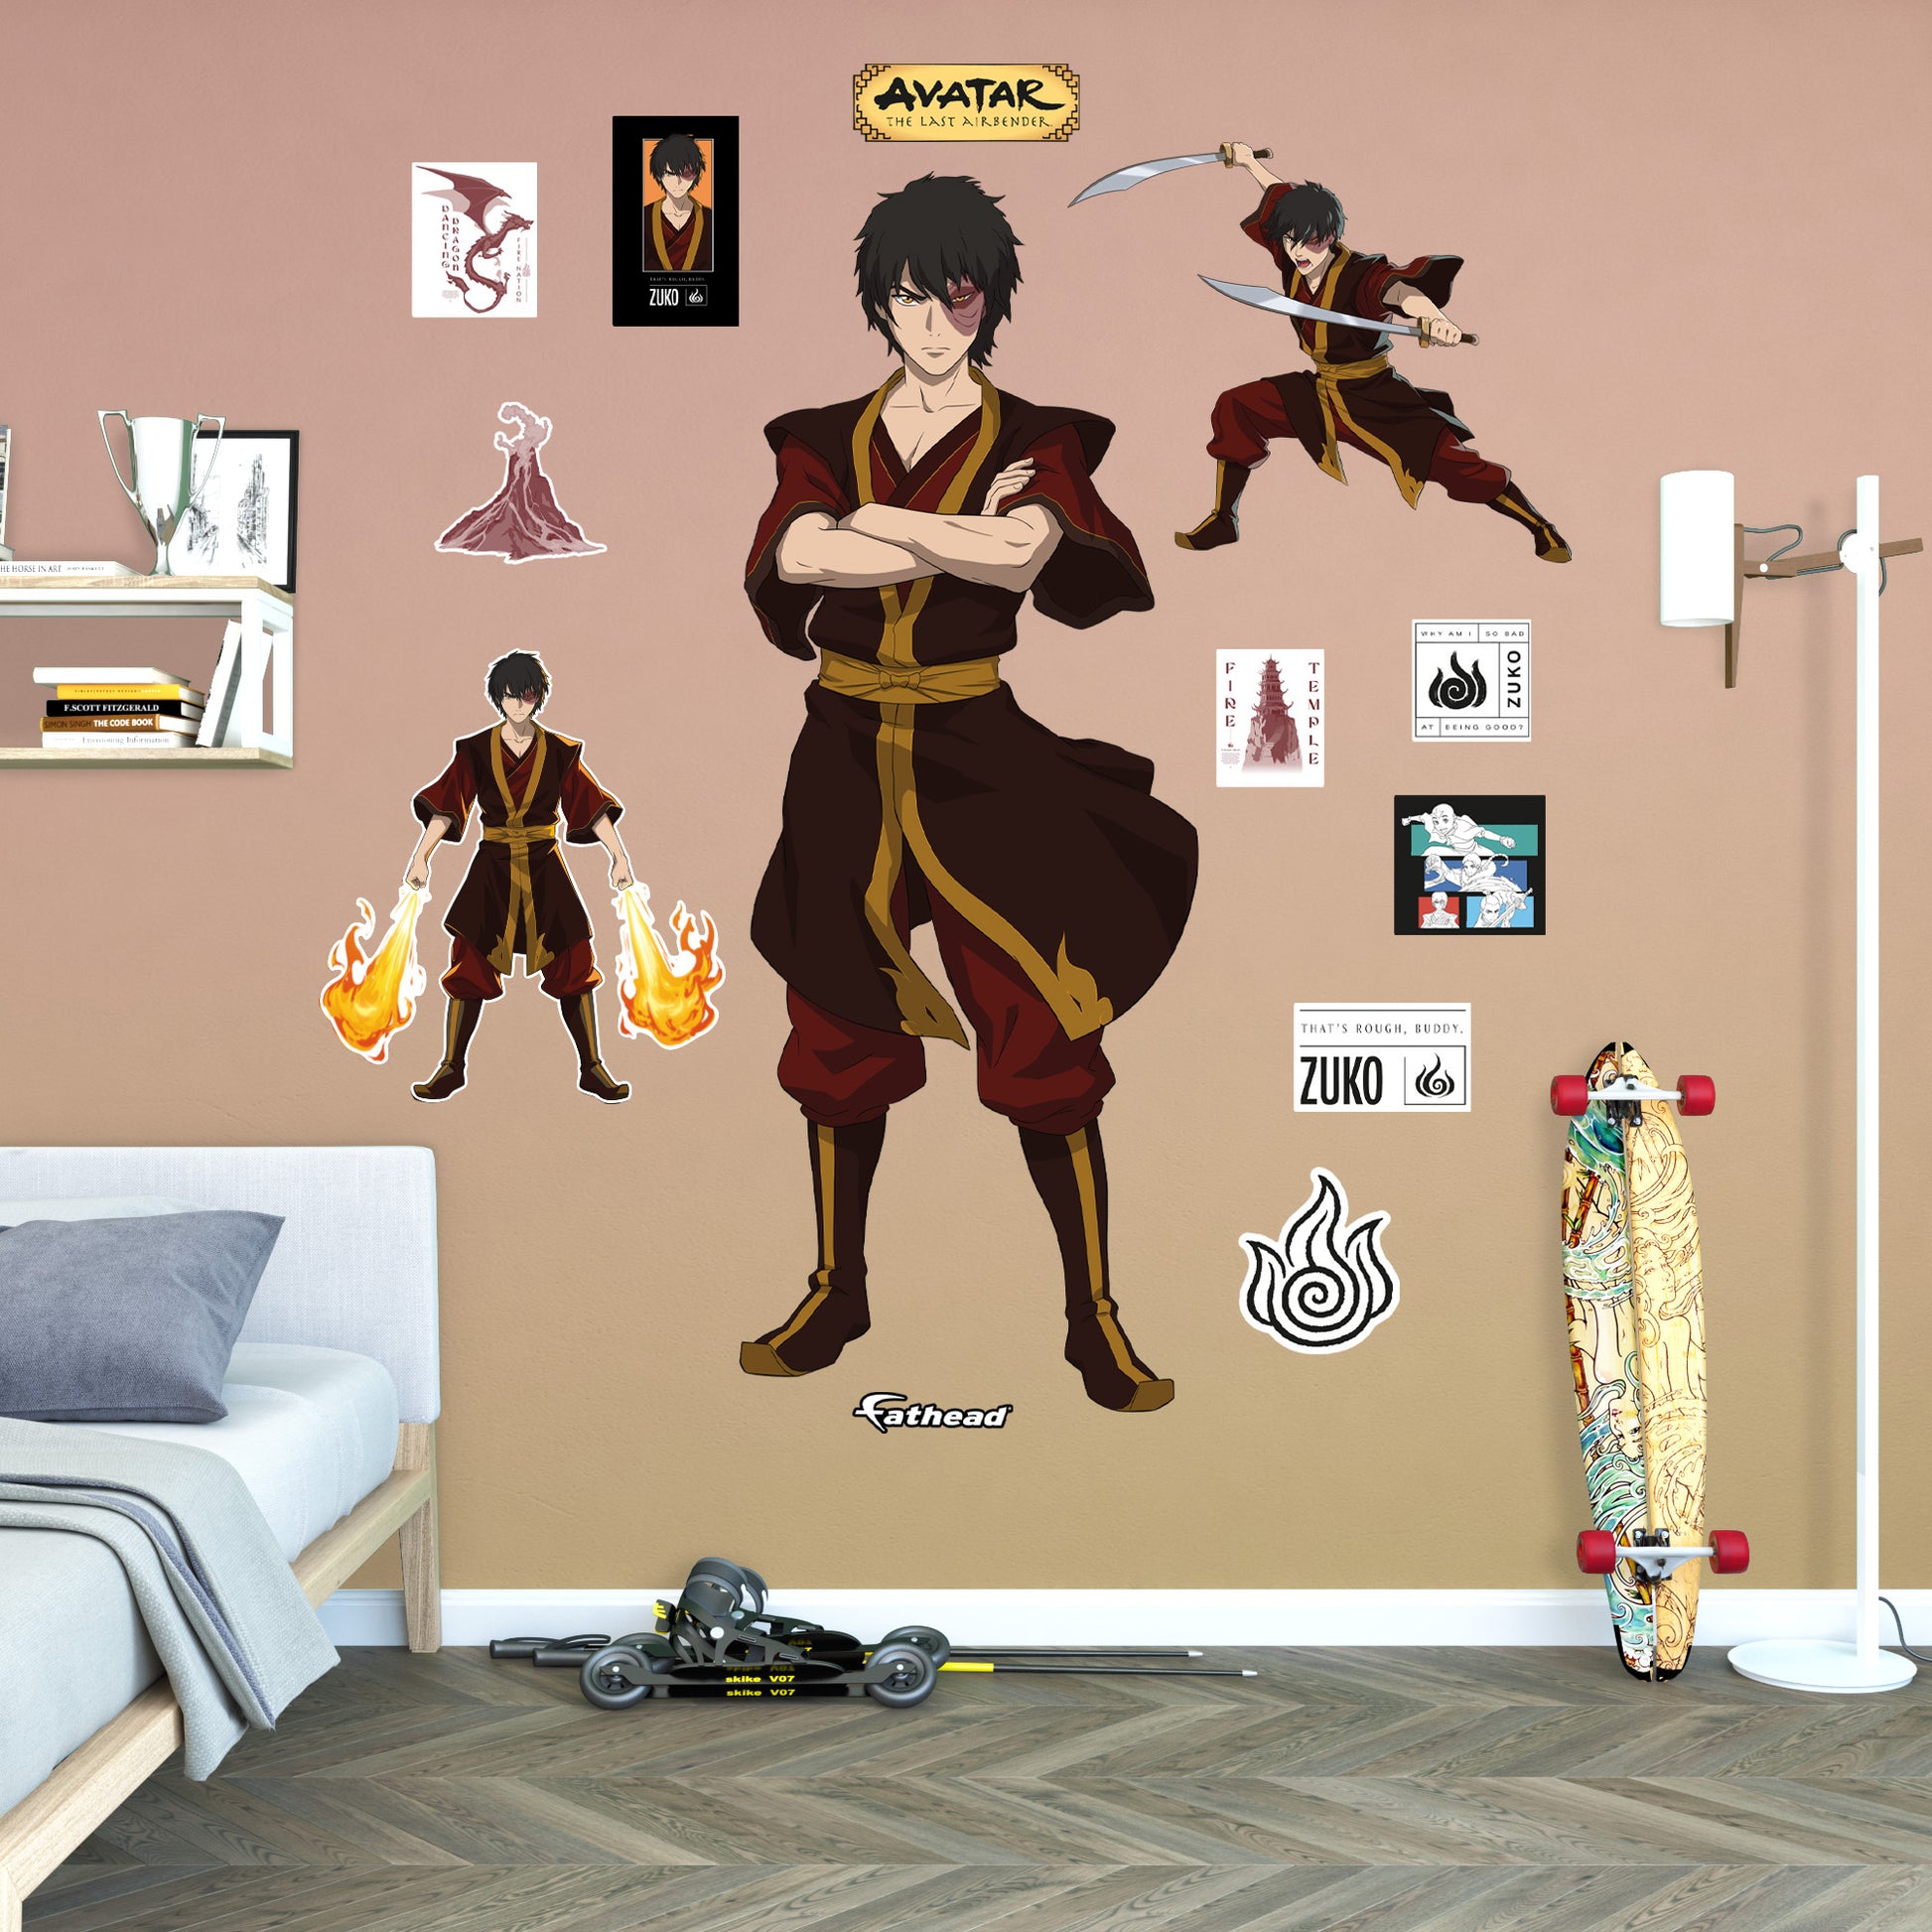 Life-Size Character +12 Decals  (29"W x 78"H) 